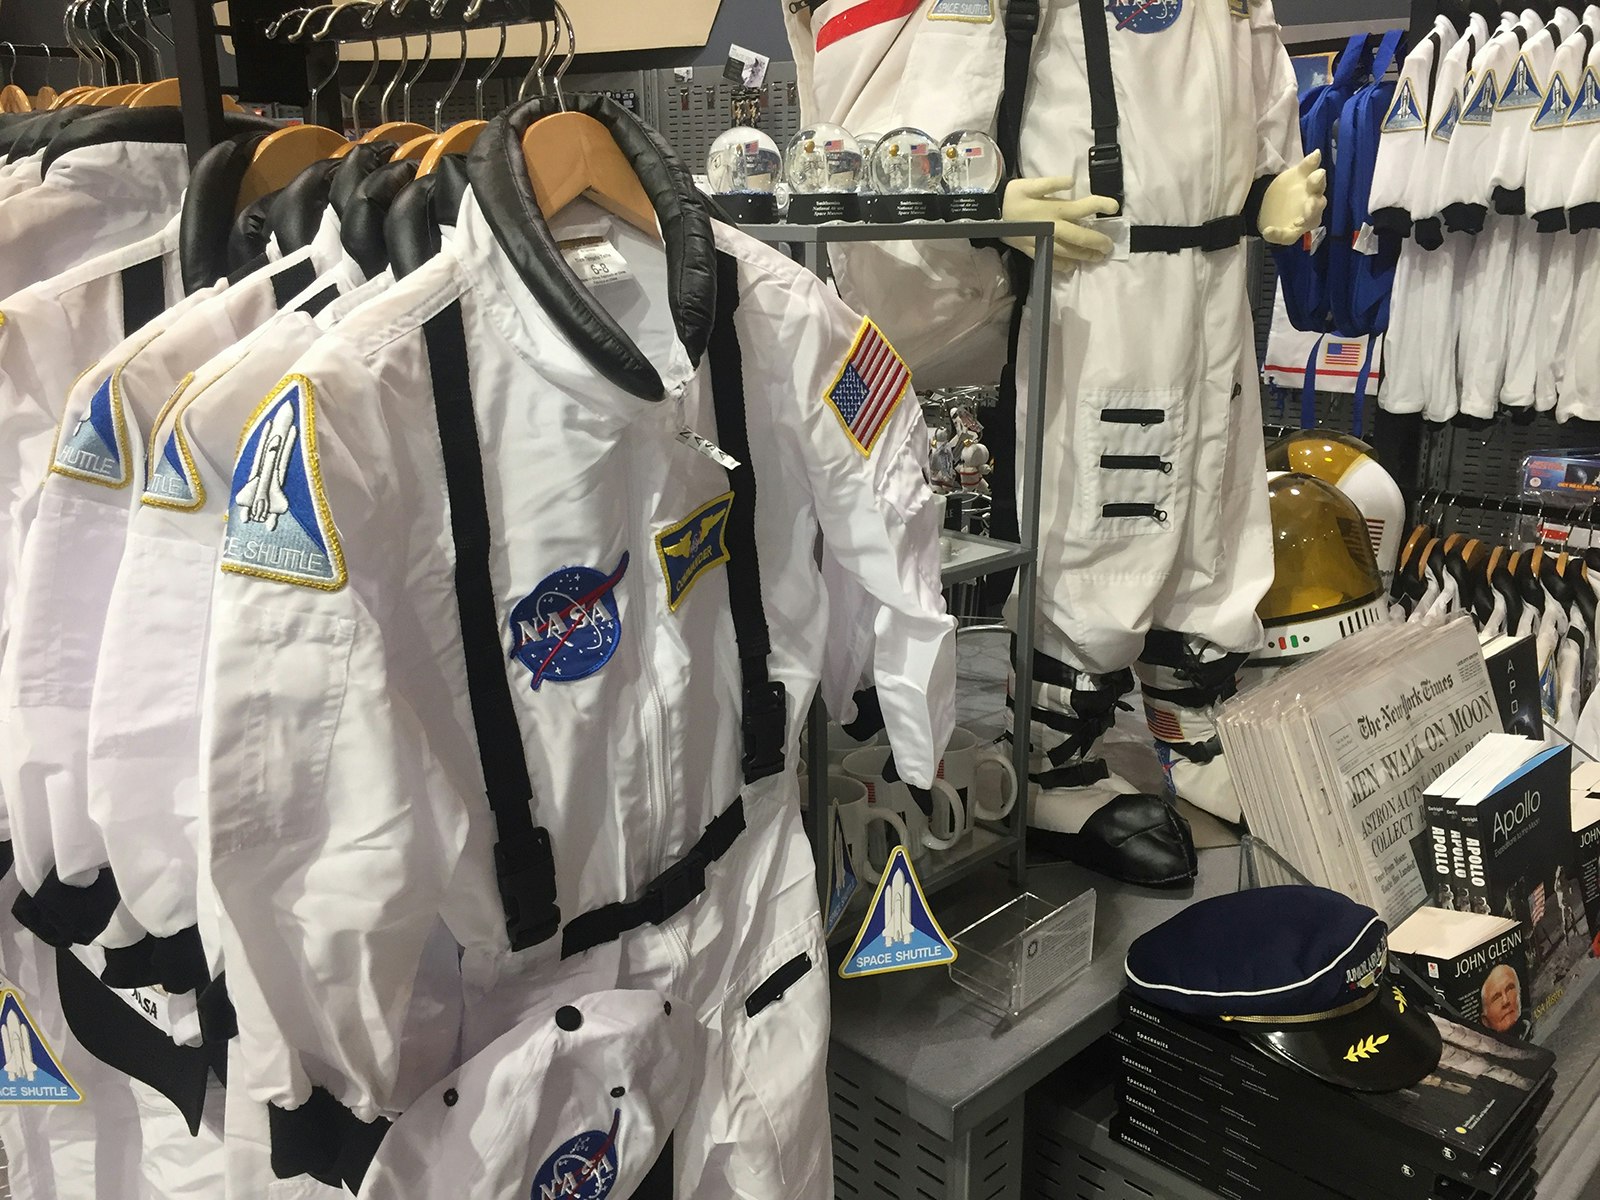 space uniforms in the gift shop of the Air & Space Museum